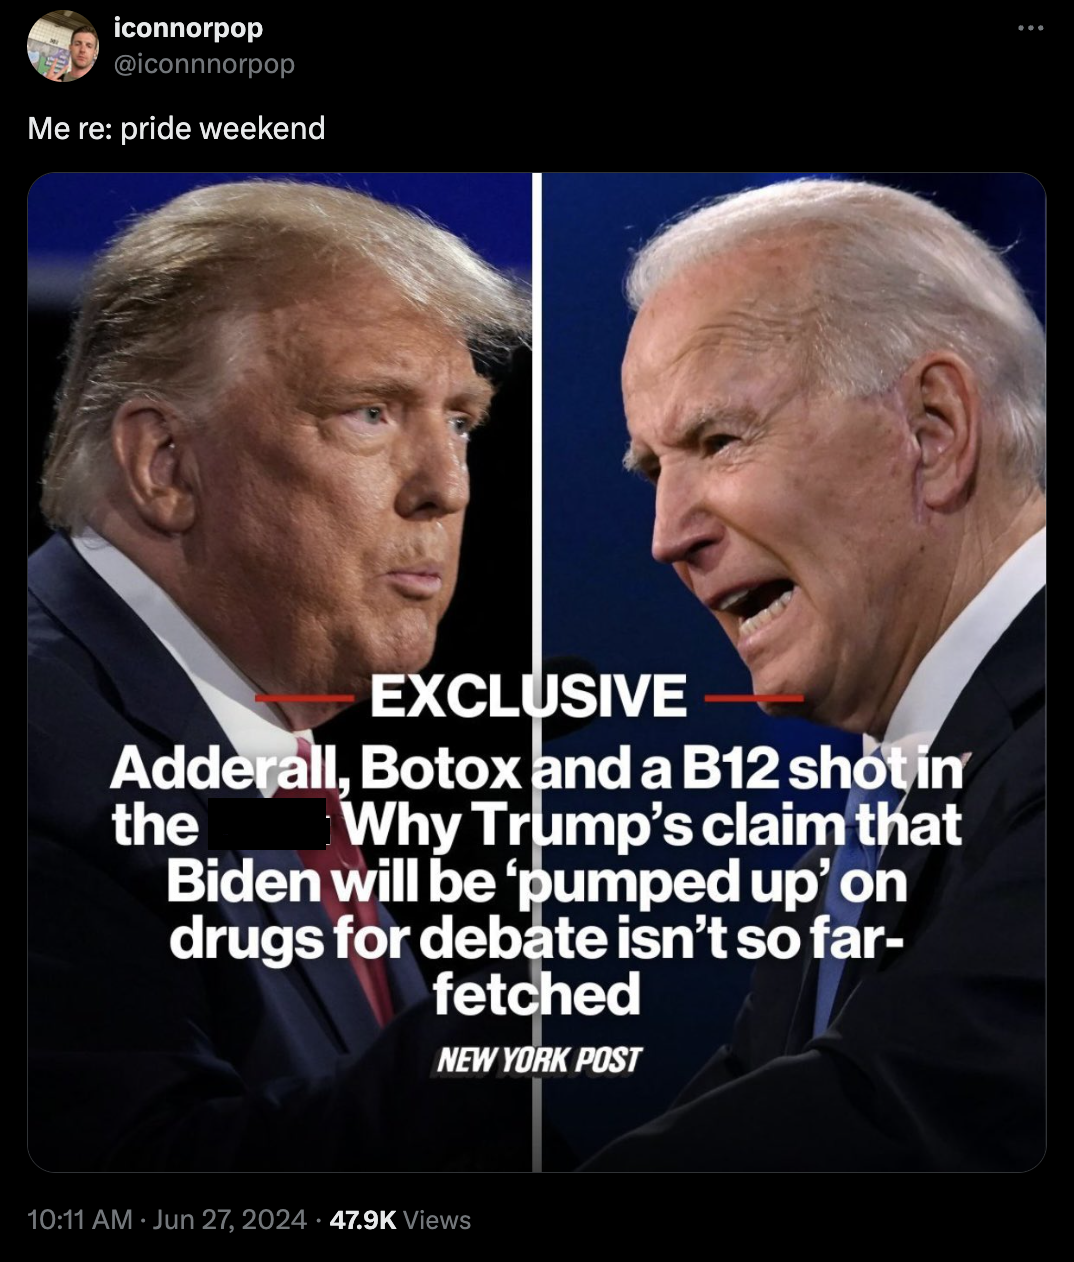 donald trump vs biden - iconnorpop Me re pride weekend Exclusive Adderall, Botox and a B12 shot in the Why Trump's claim that Biden will be 'pumped up' on drugs for debate isn't so far fetched New York Post Views